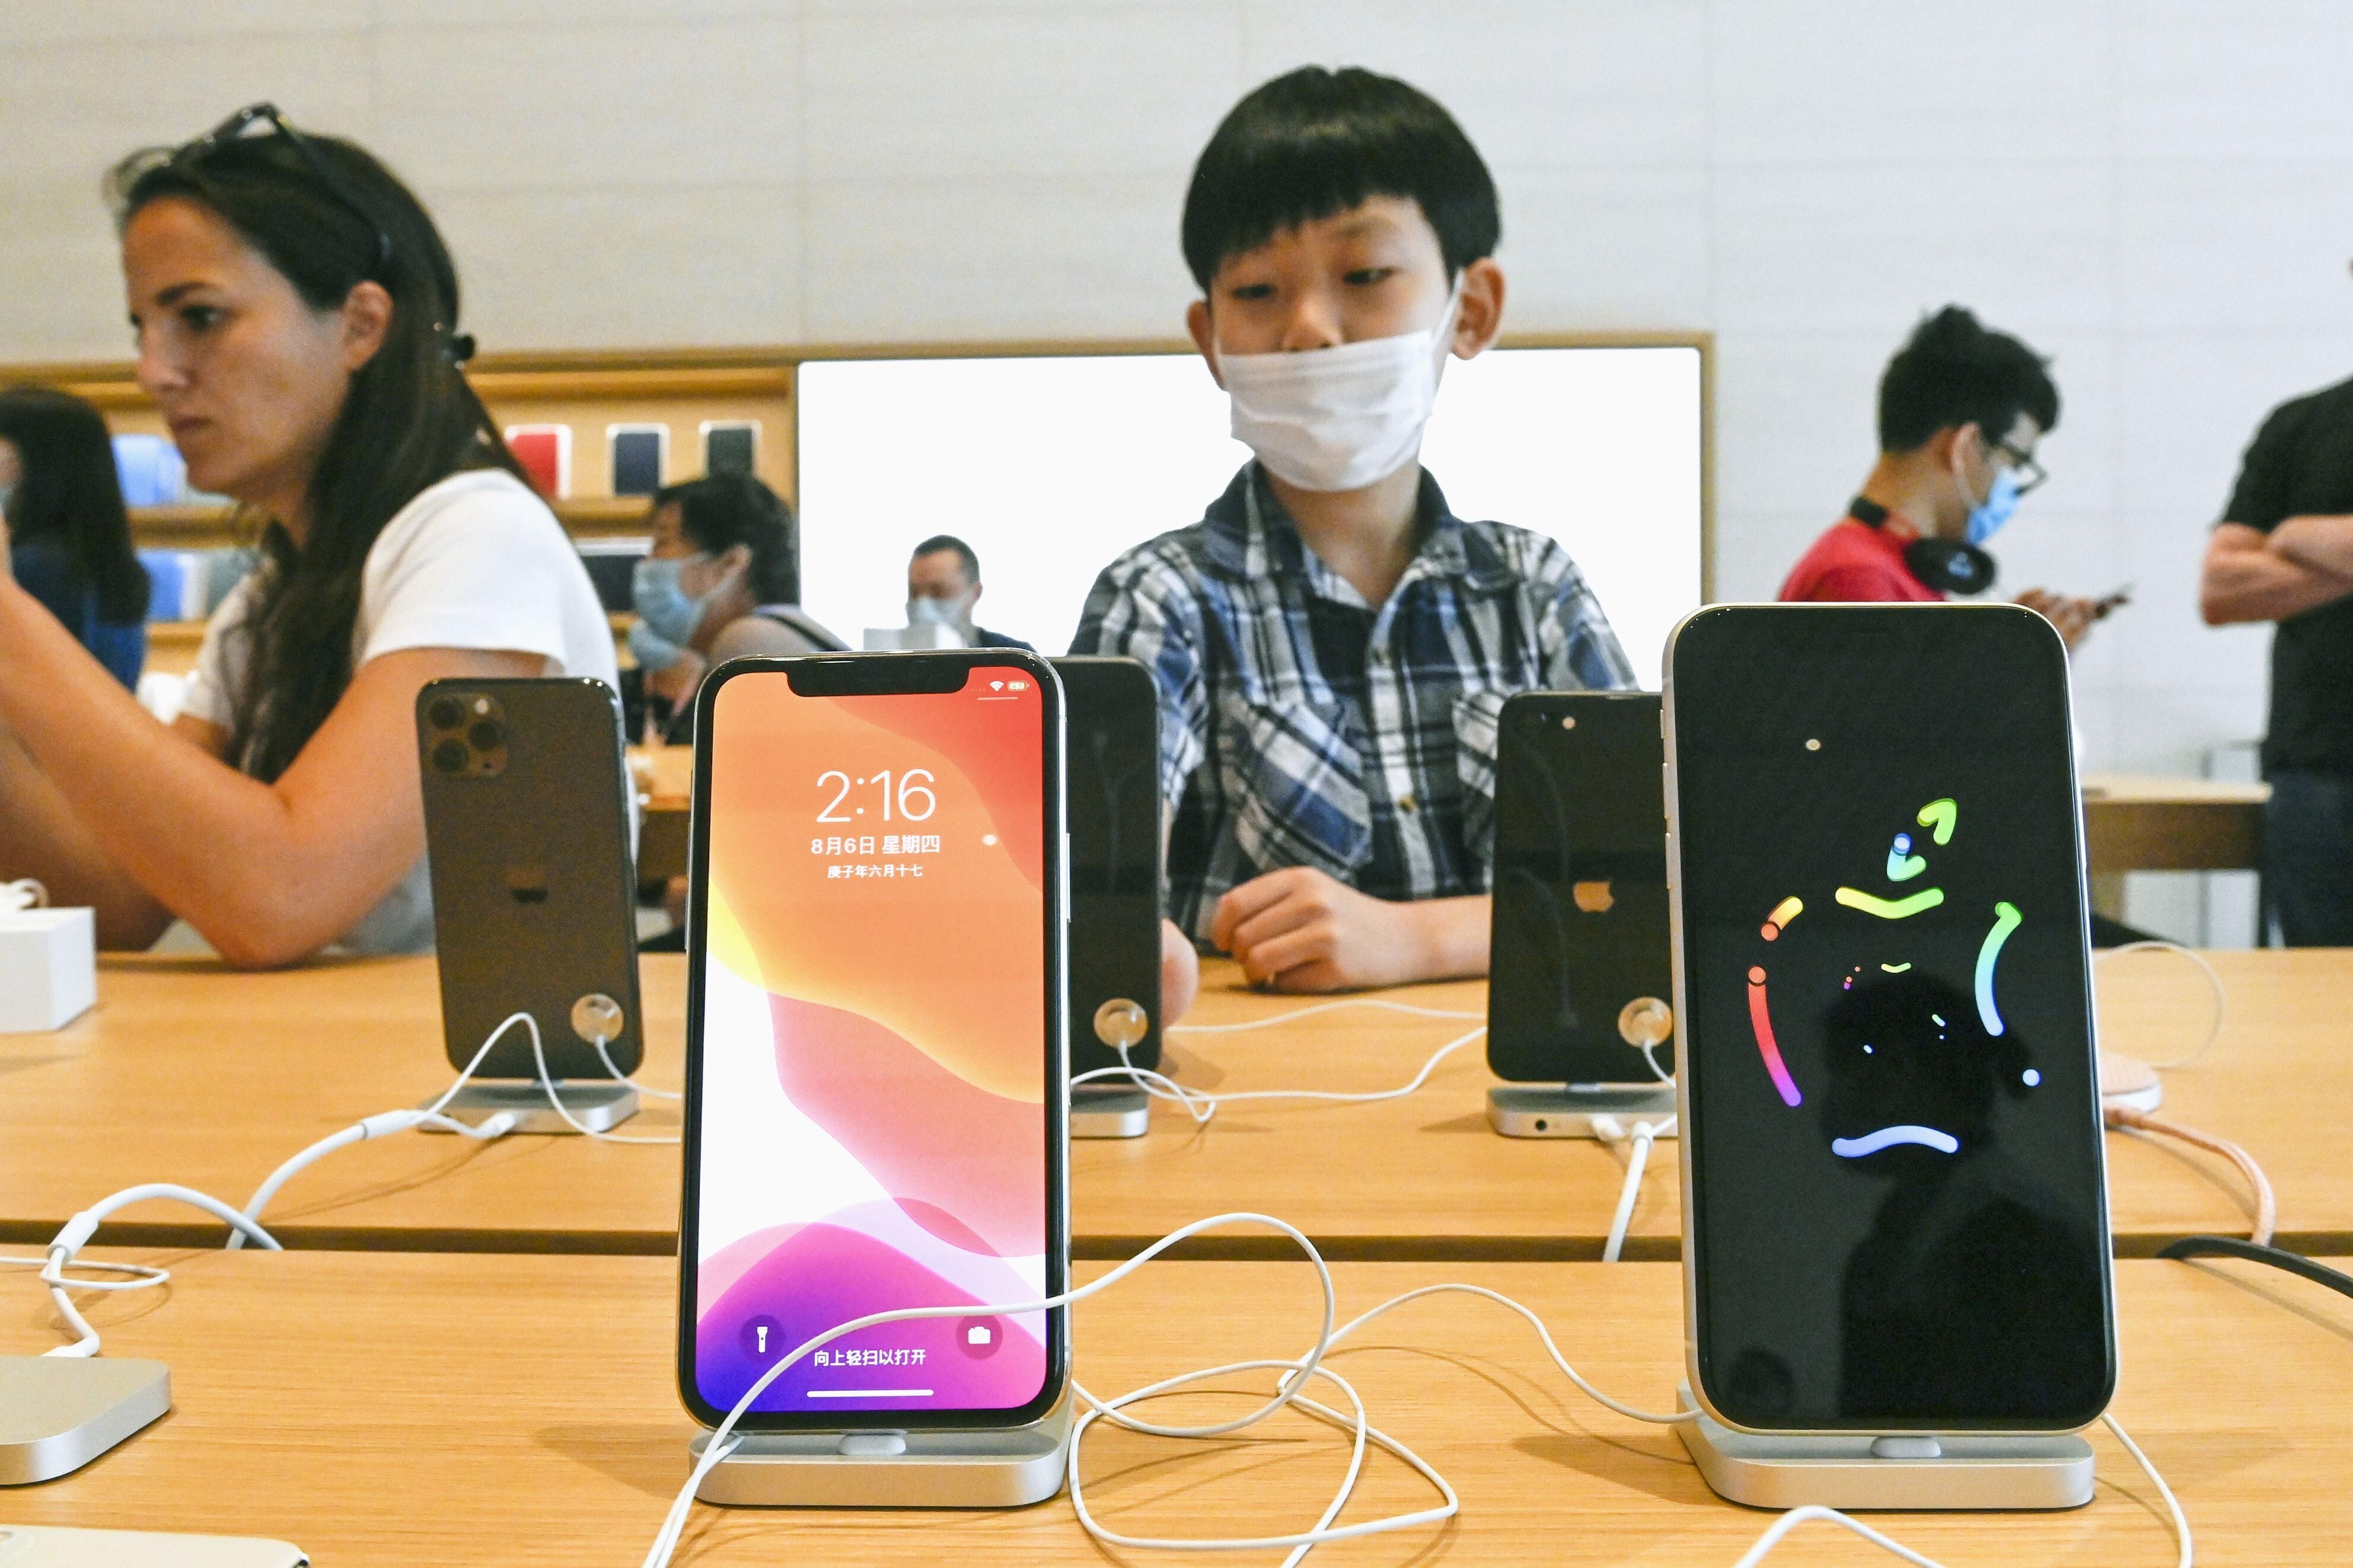 A Beijing Apple store’s iPhone display. China is an important market for Apple products, as well as being a key supply chain partner. Photo: Kyodo